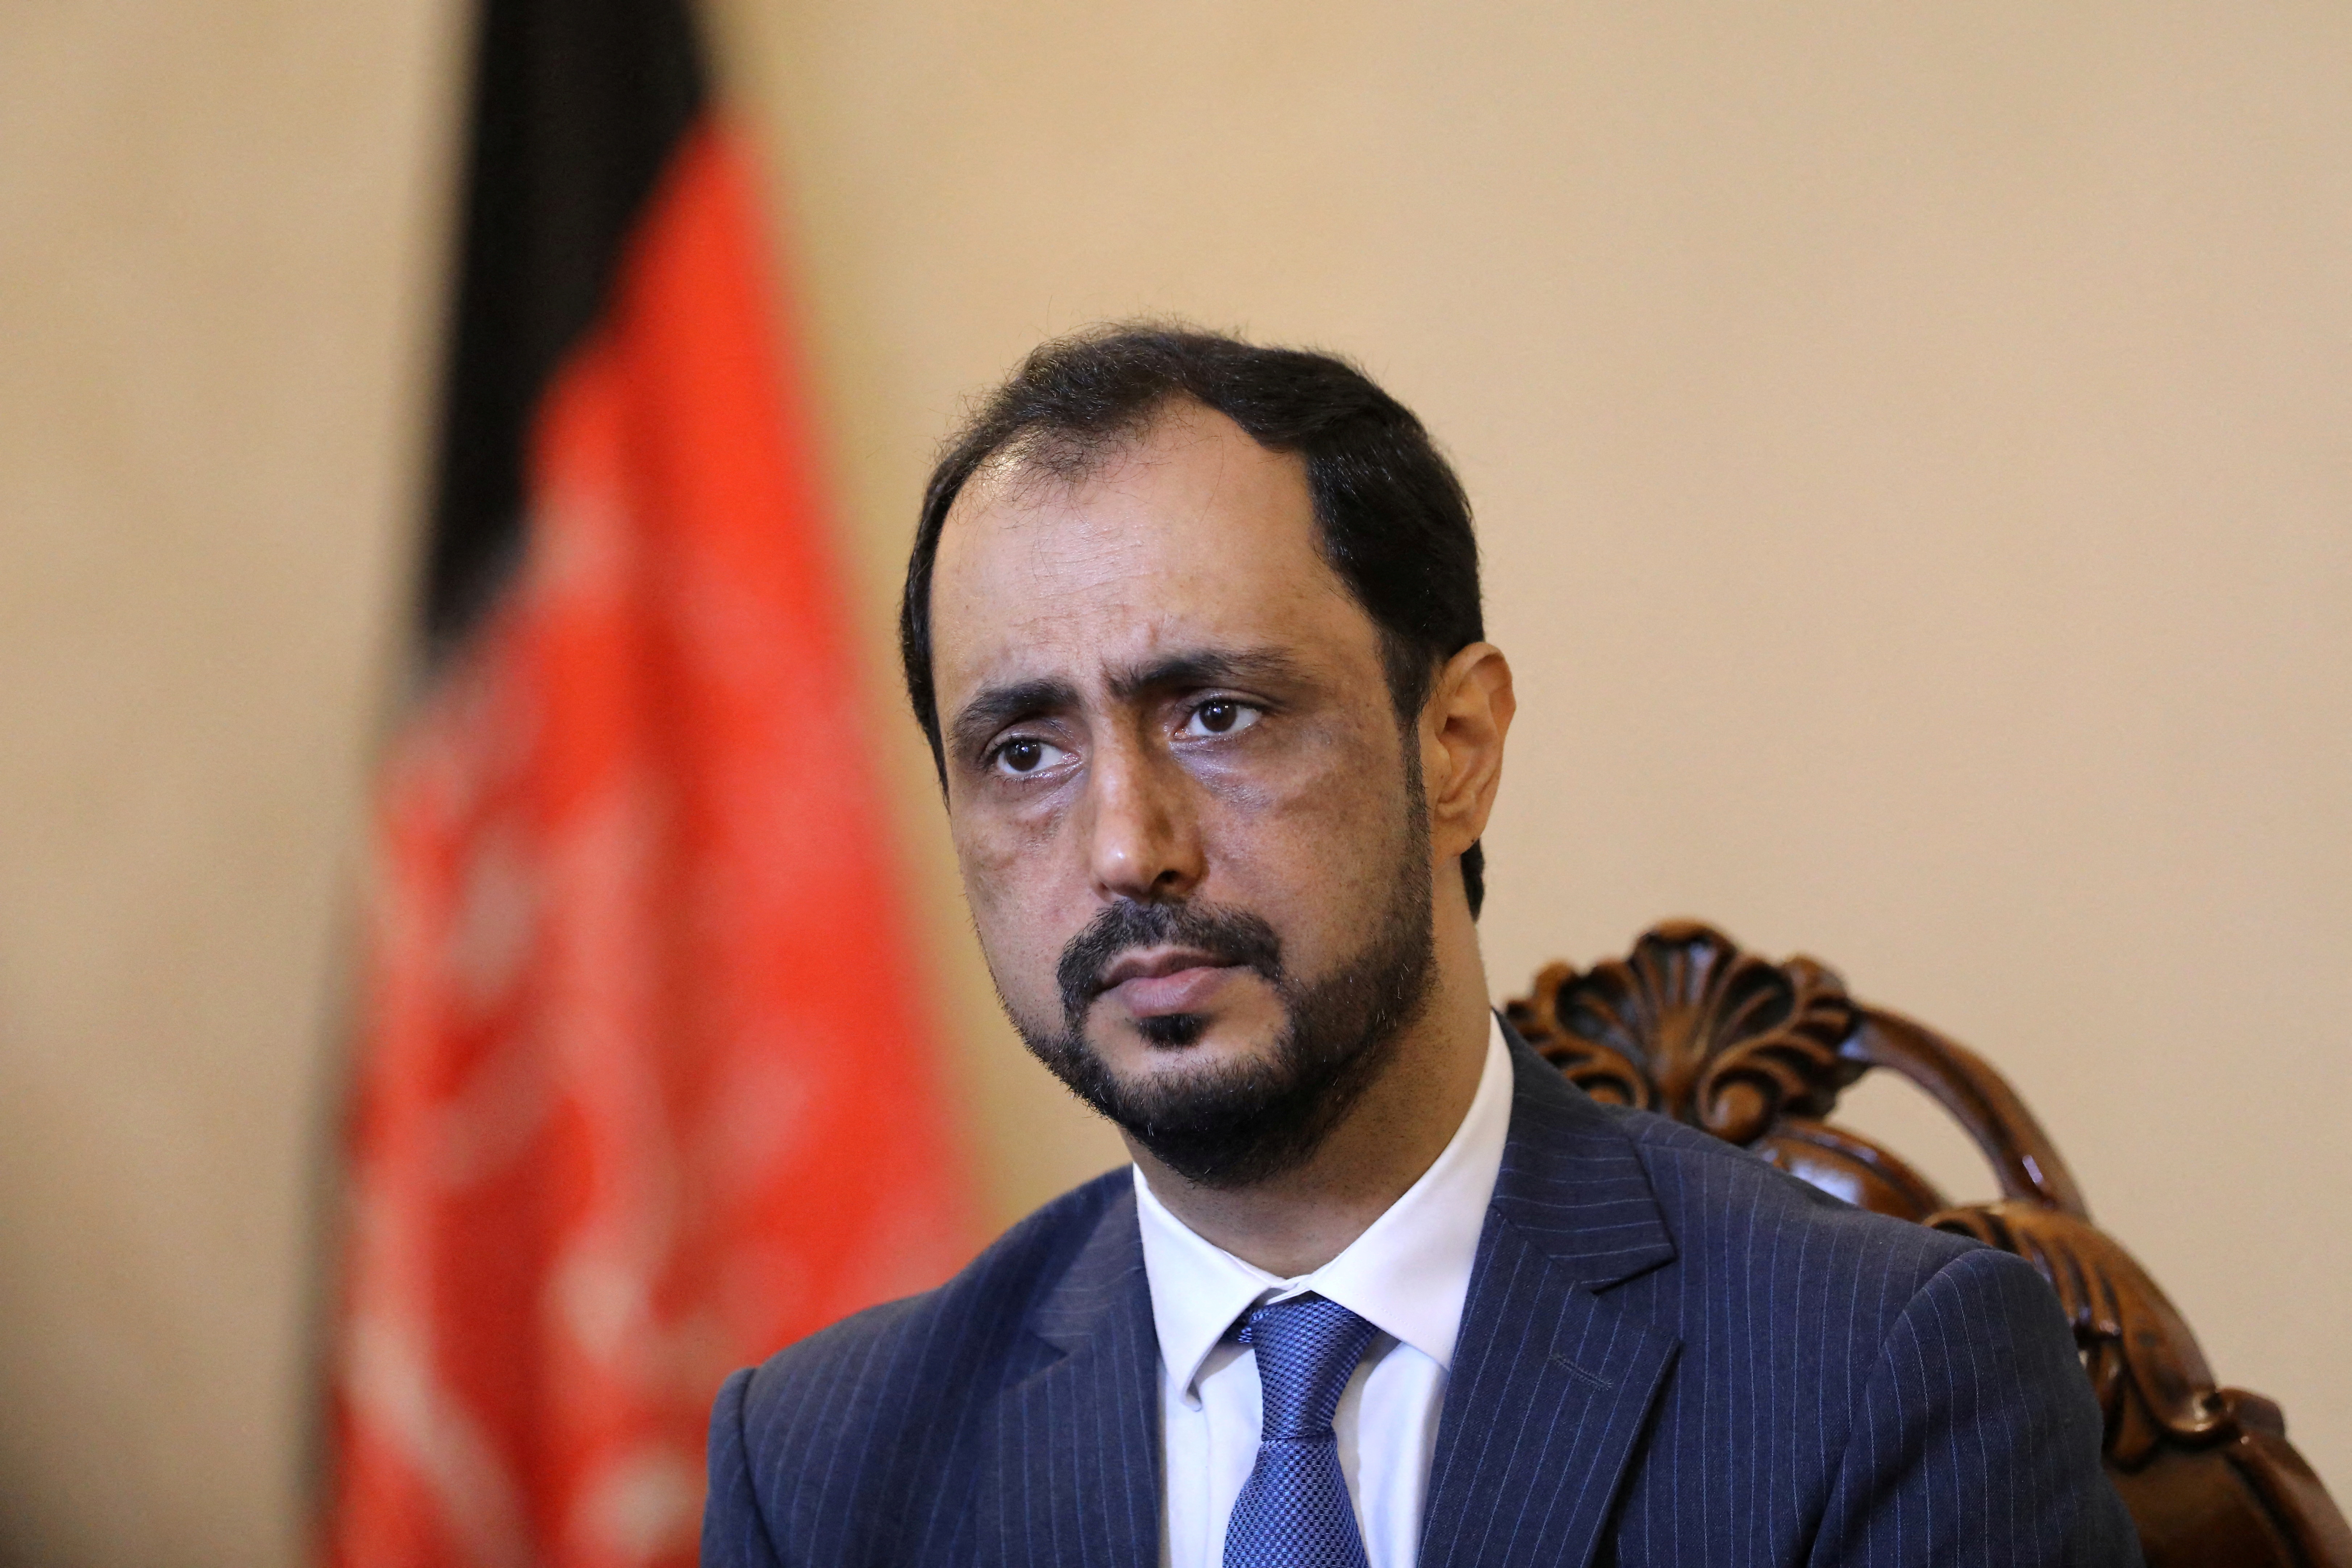 Afghanistan's China envoy leaves after months without pay | Reuters